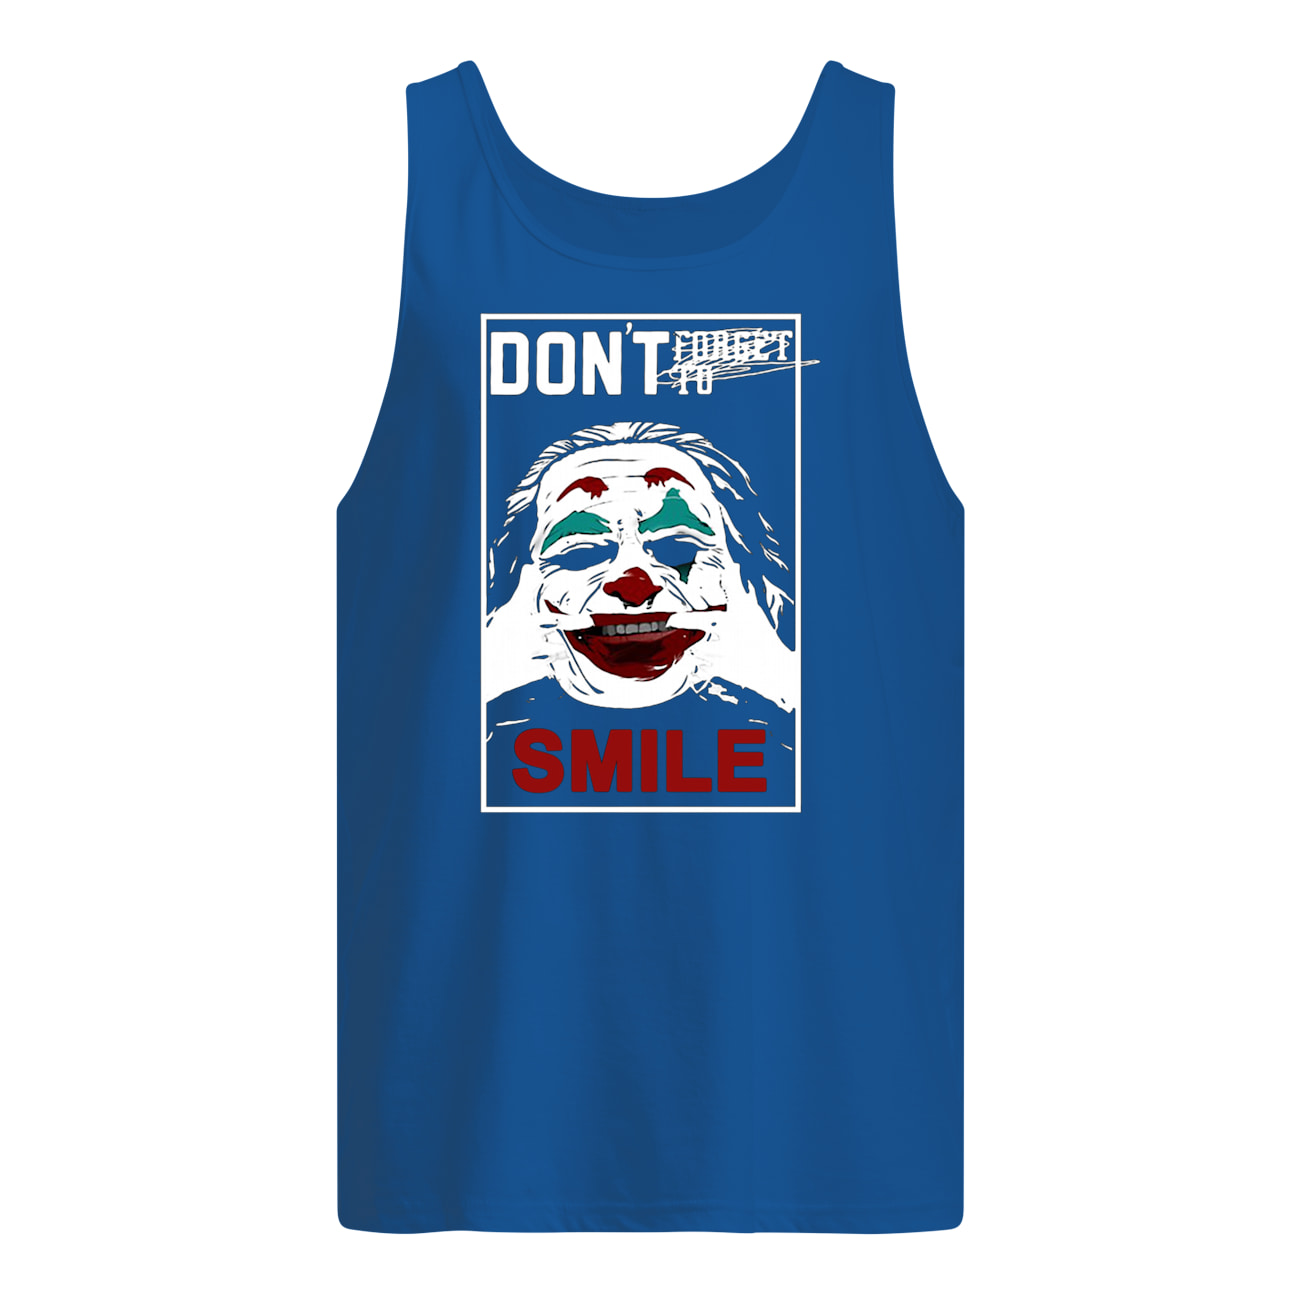 Joker don’t forget to smile tank top